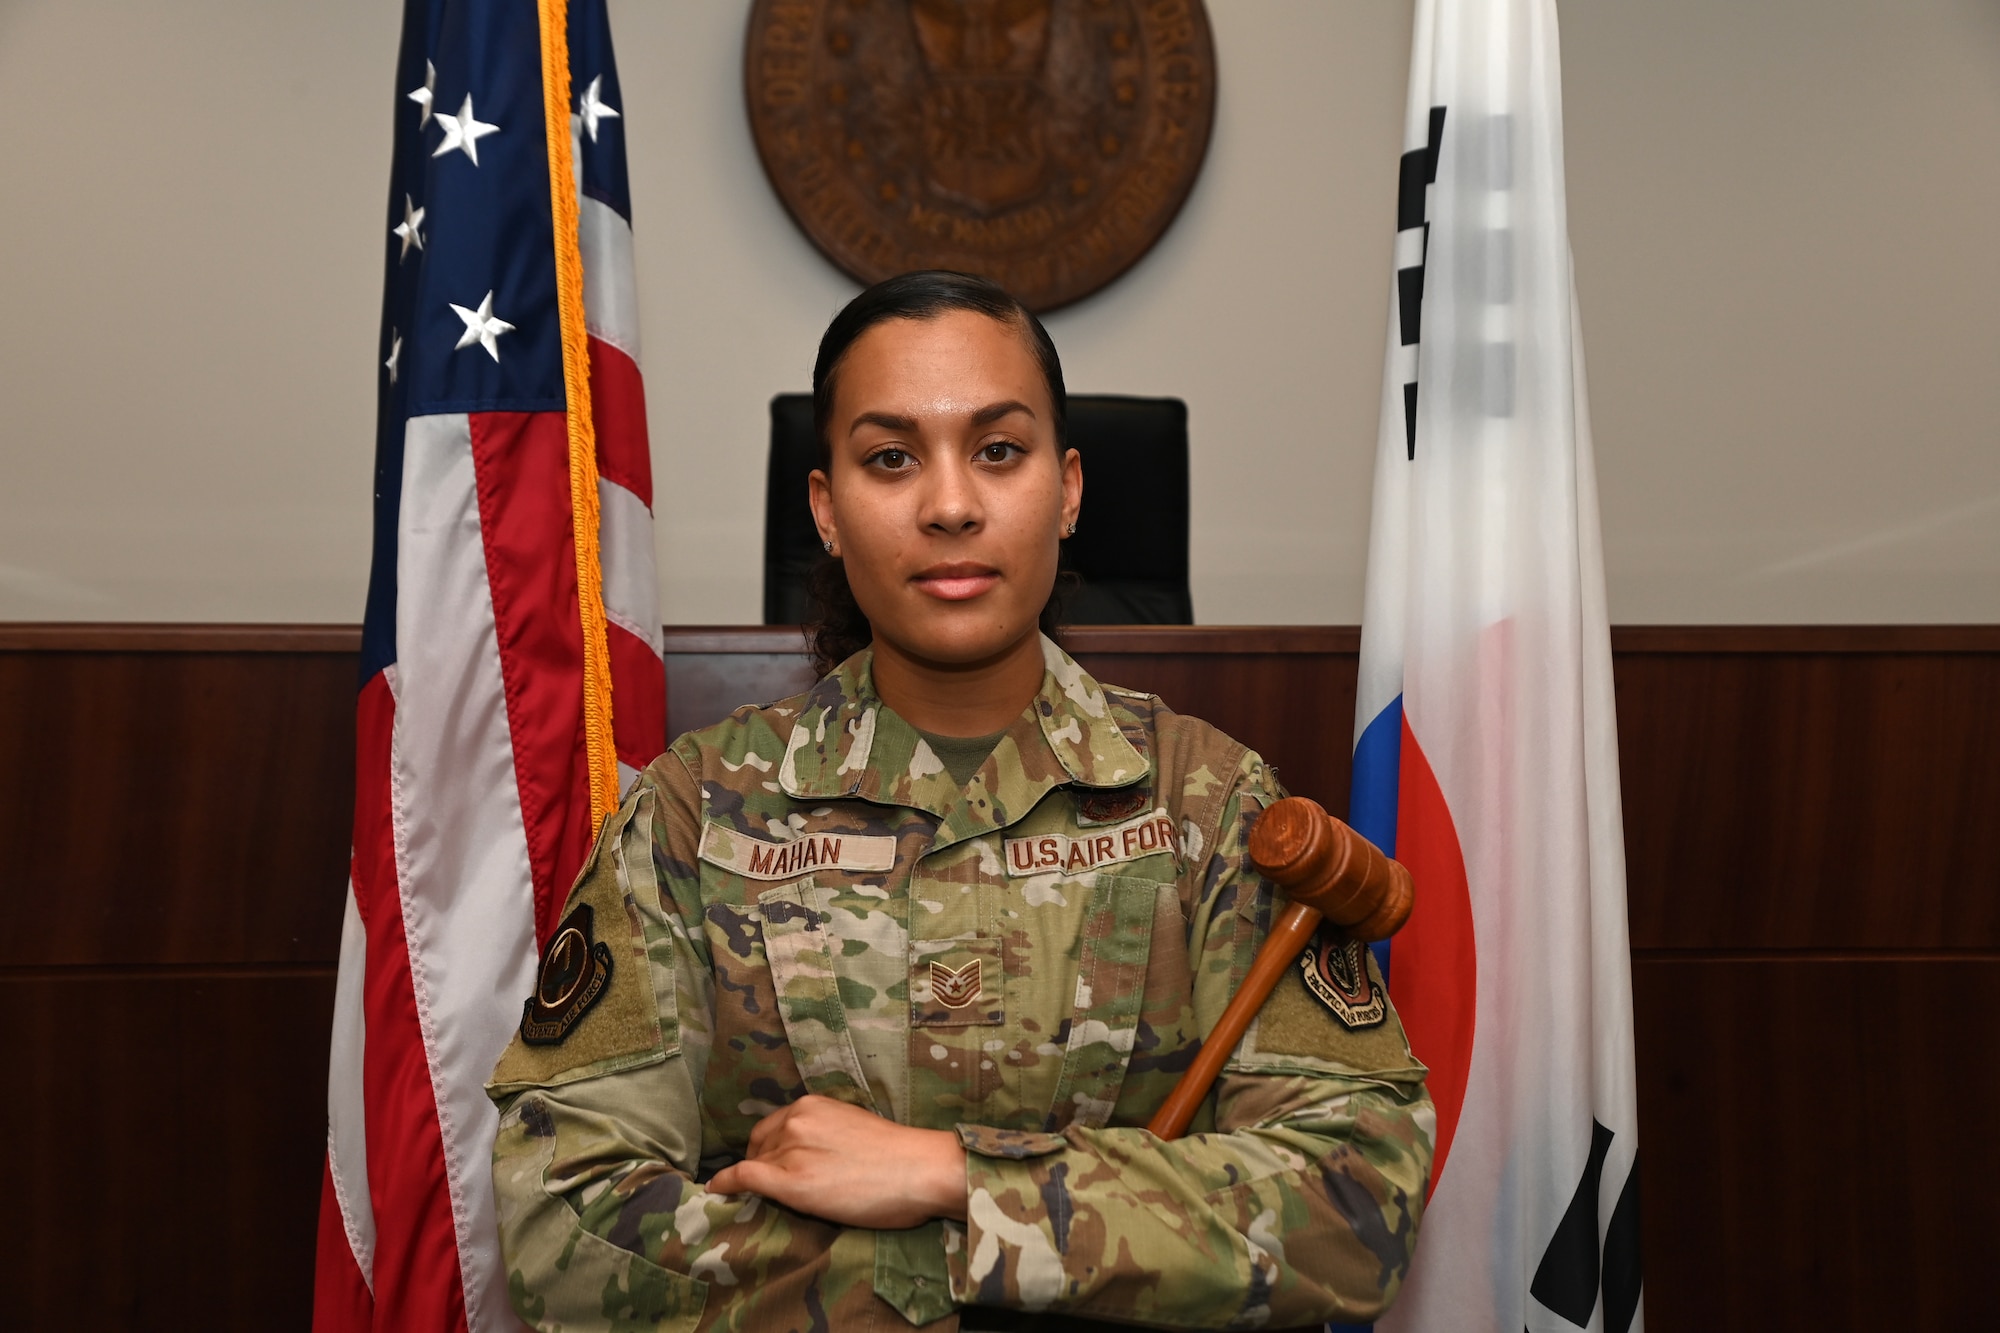 Tech. Sgt. Micaela Mahan, 7th Air Force Office of the Staff Judge Advocate, poses for a photo in a courtroom at Osan Air Base, Republic of Korea, July 20, 2023.